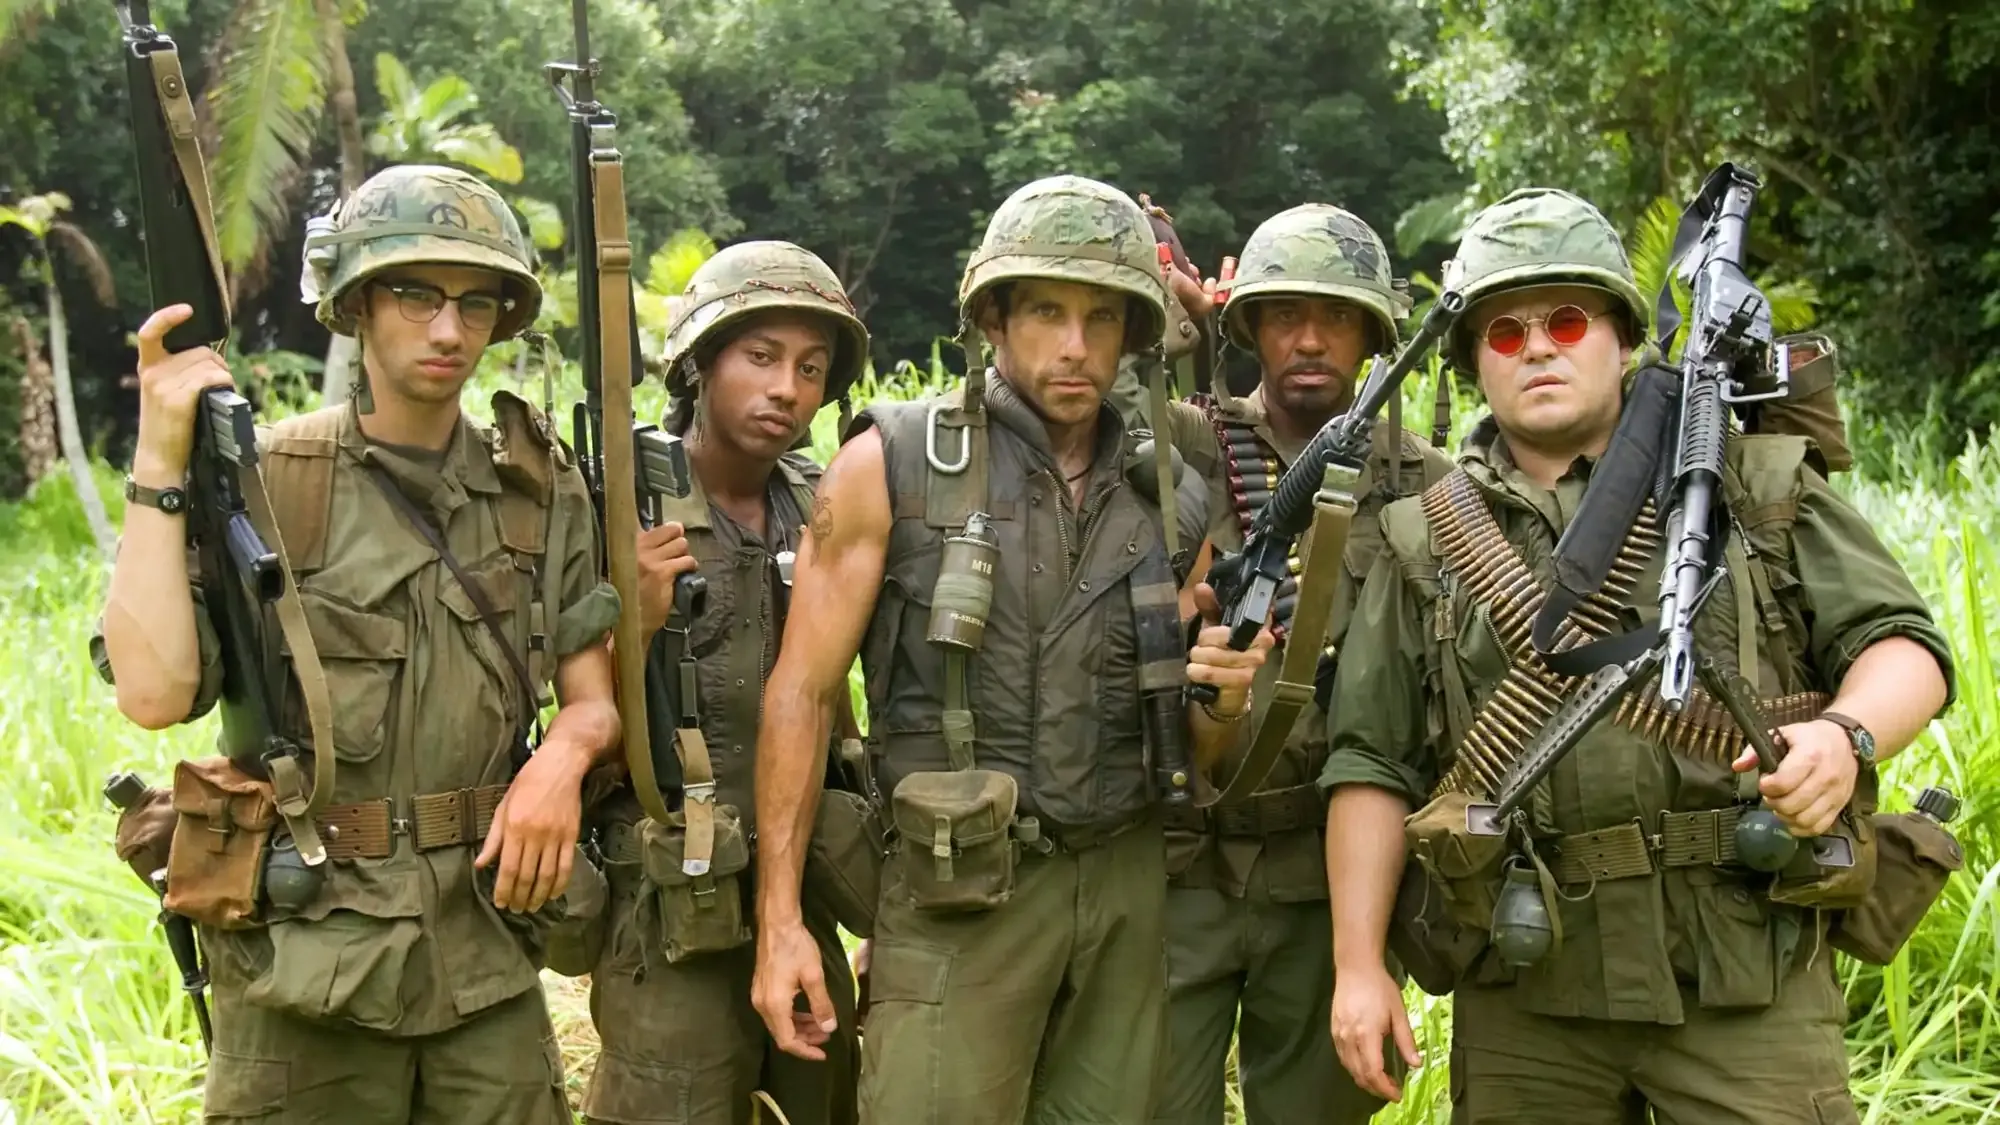 Tropic Thunder movie review